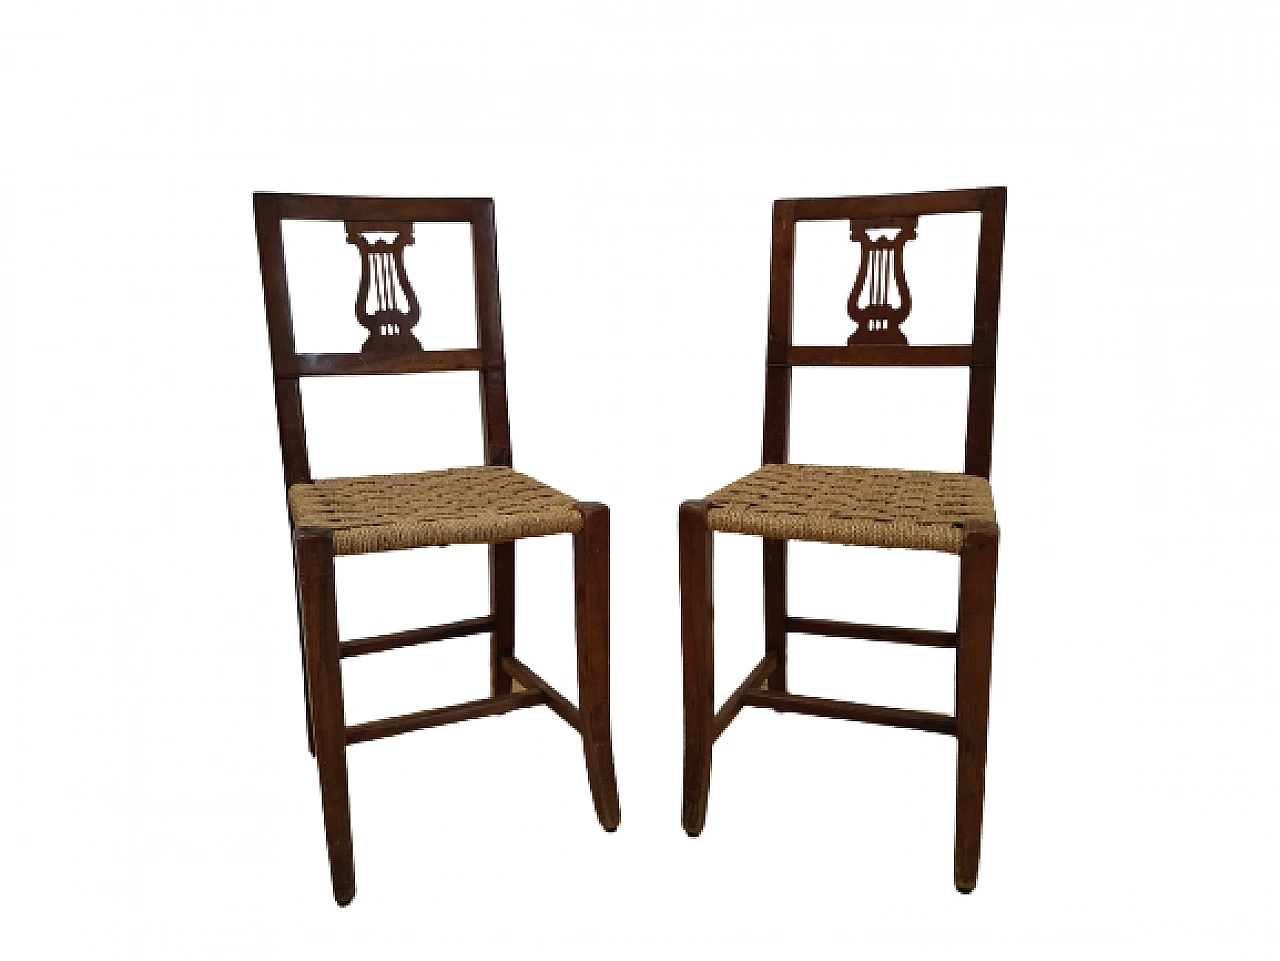 Pair of Empire solid walnut and straw chairs, early 19th century 11